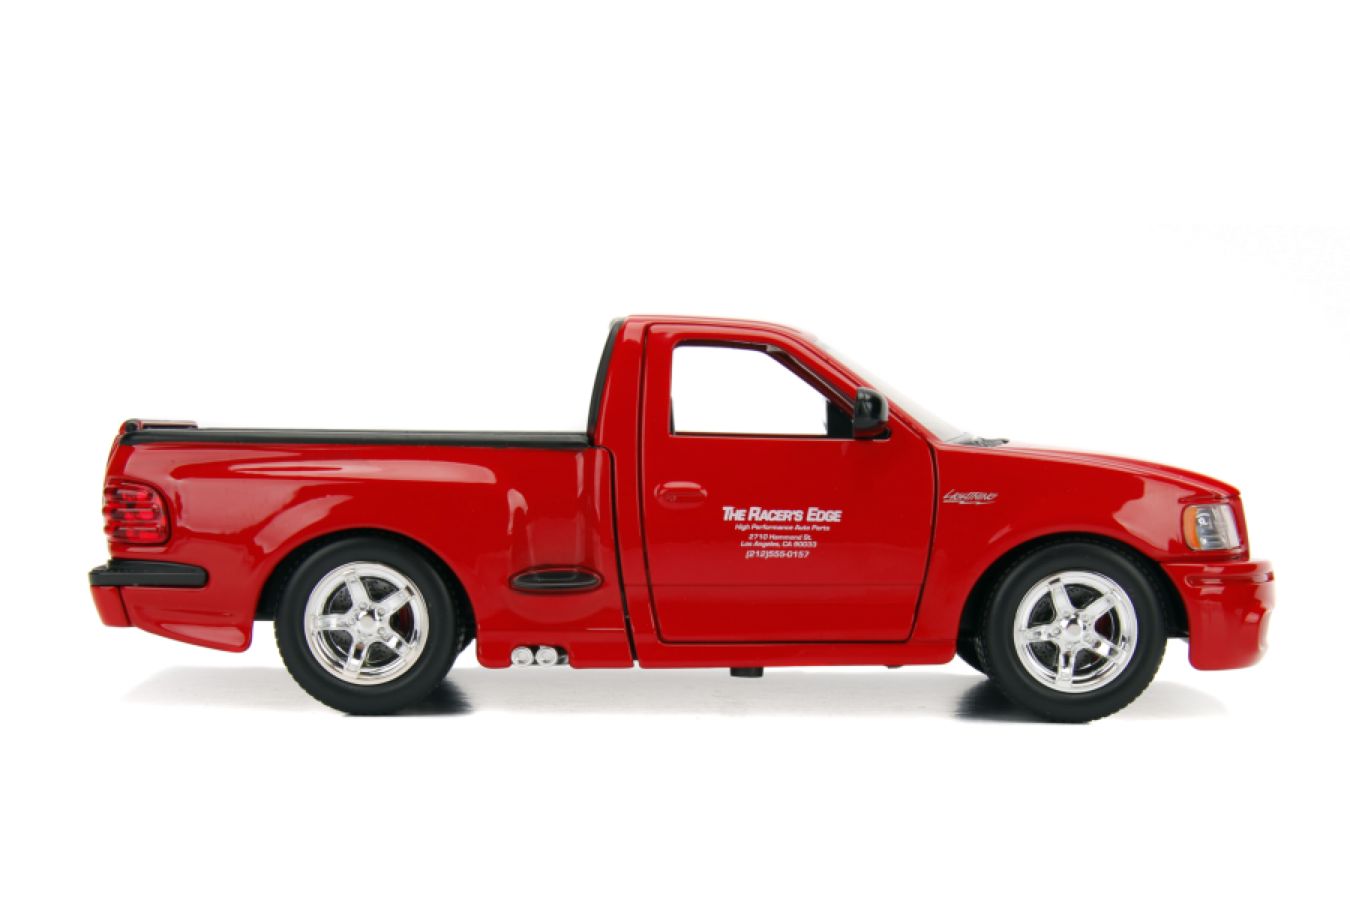 Fast and Furious - 1999 Ford SVT F-150 Lightning 1:24 Scale